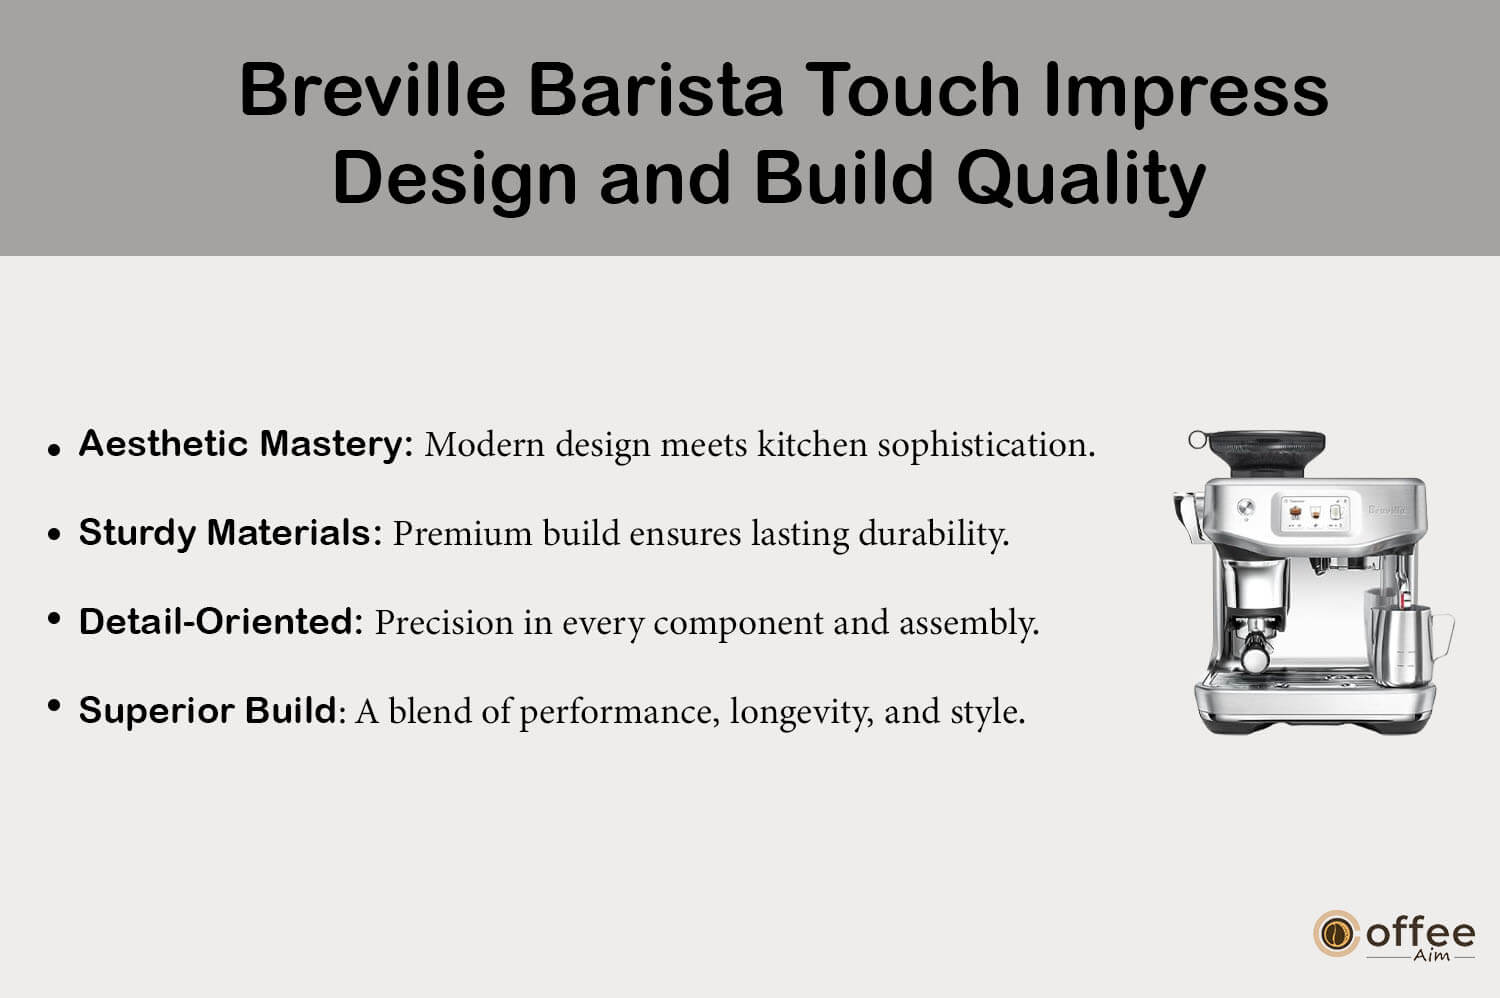 "This visual showcases the design intricacies and robust construction of the 'Breville Barista Touch Impress', as detailed in our 'Breville Barista Touch Impress Review'.''